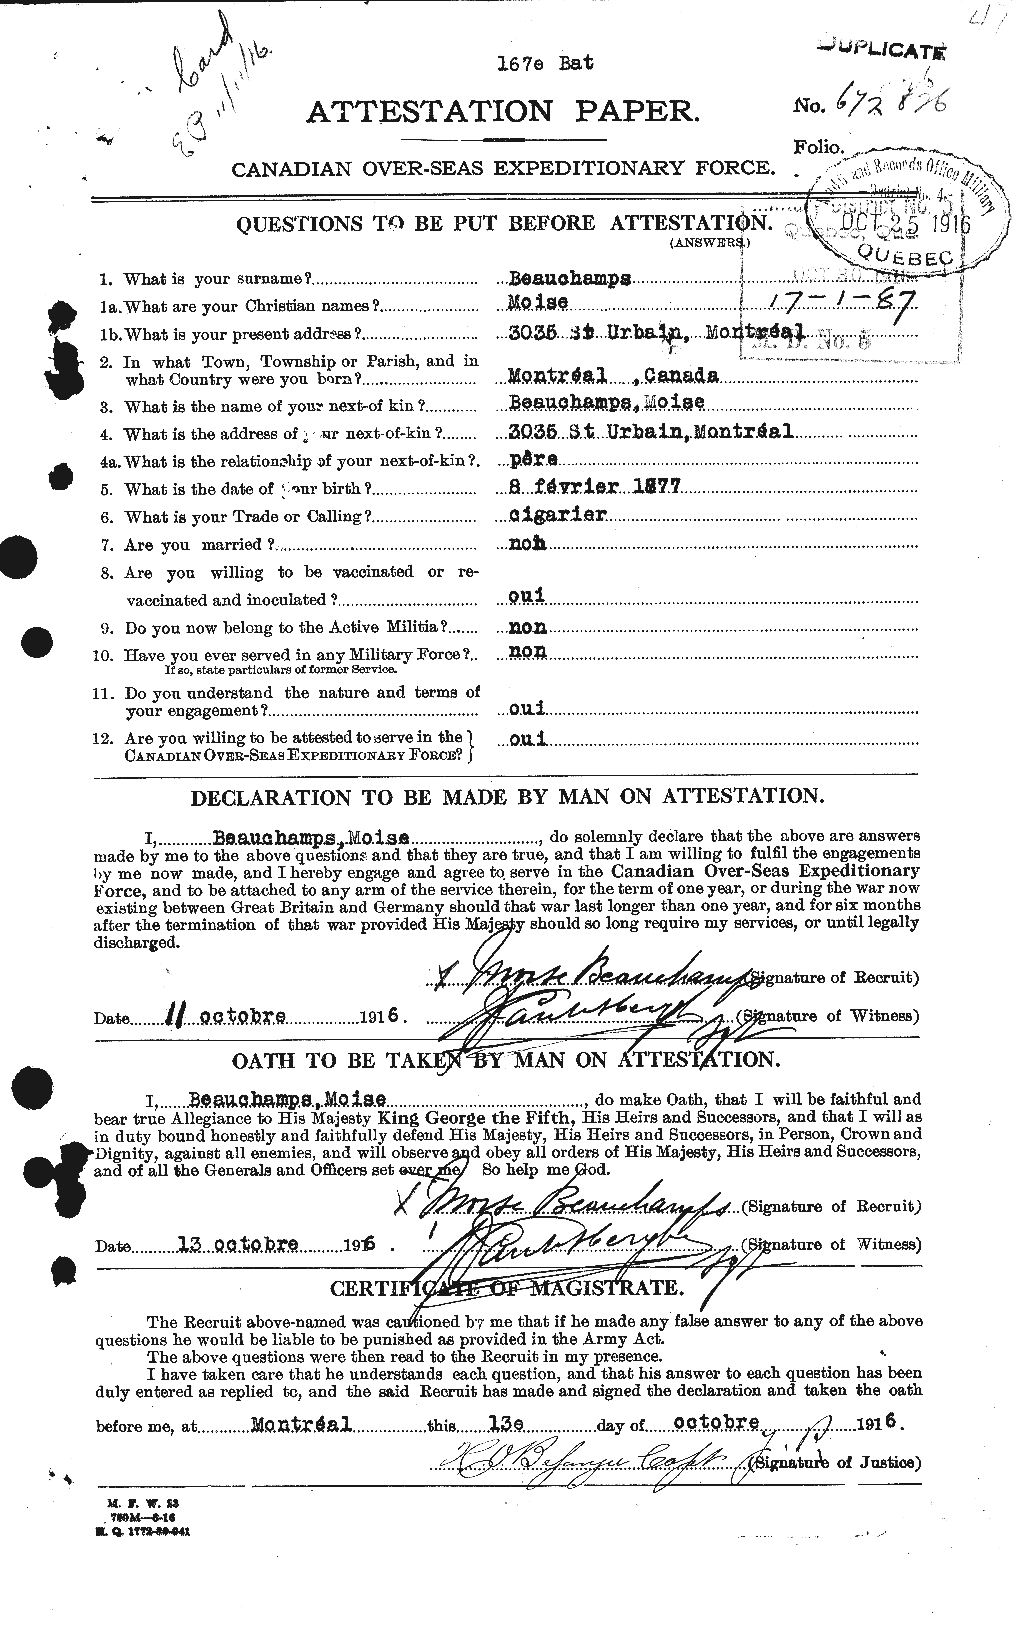 Personnel Records of the First World War - CEF 231010a